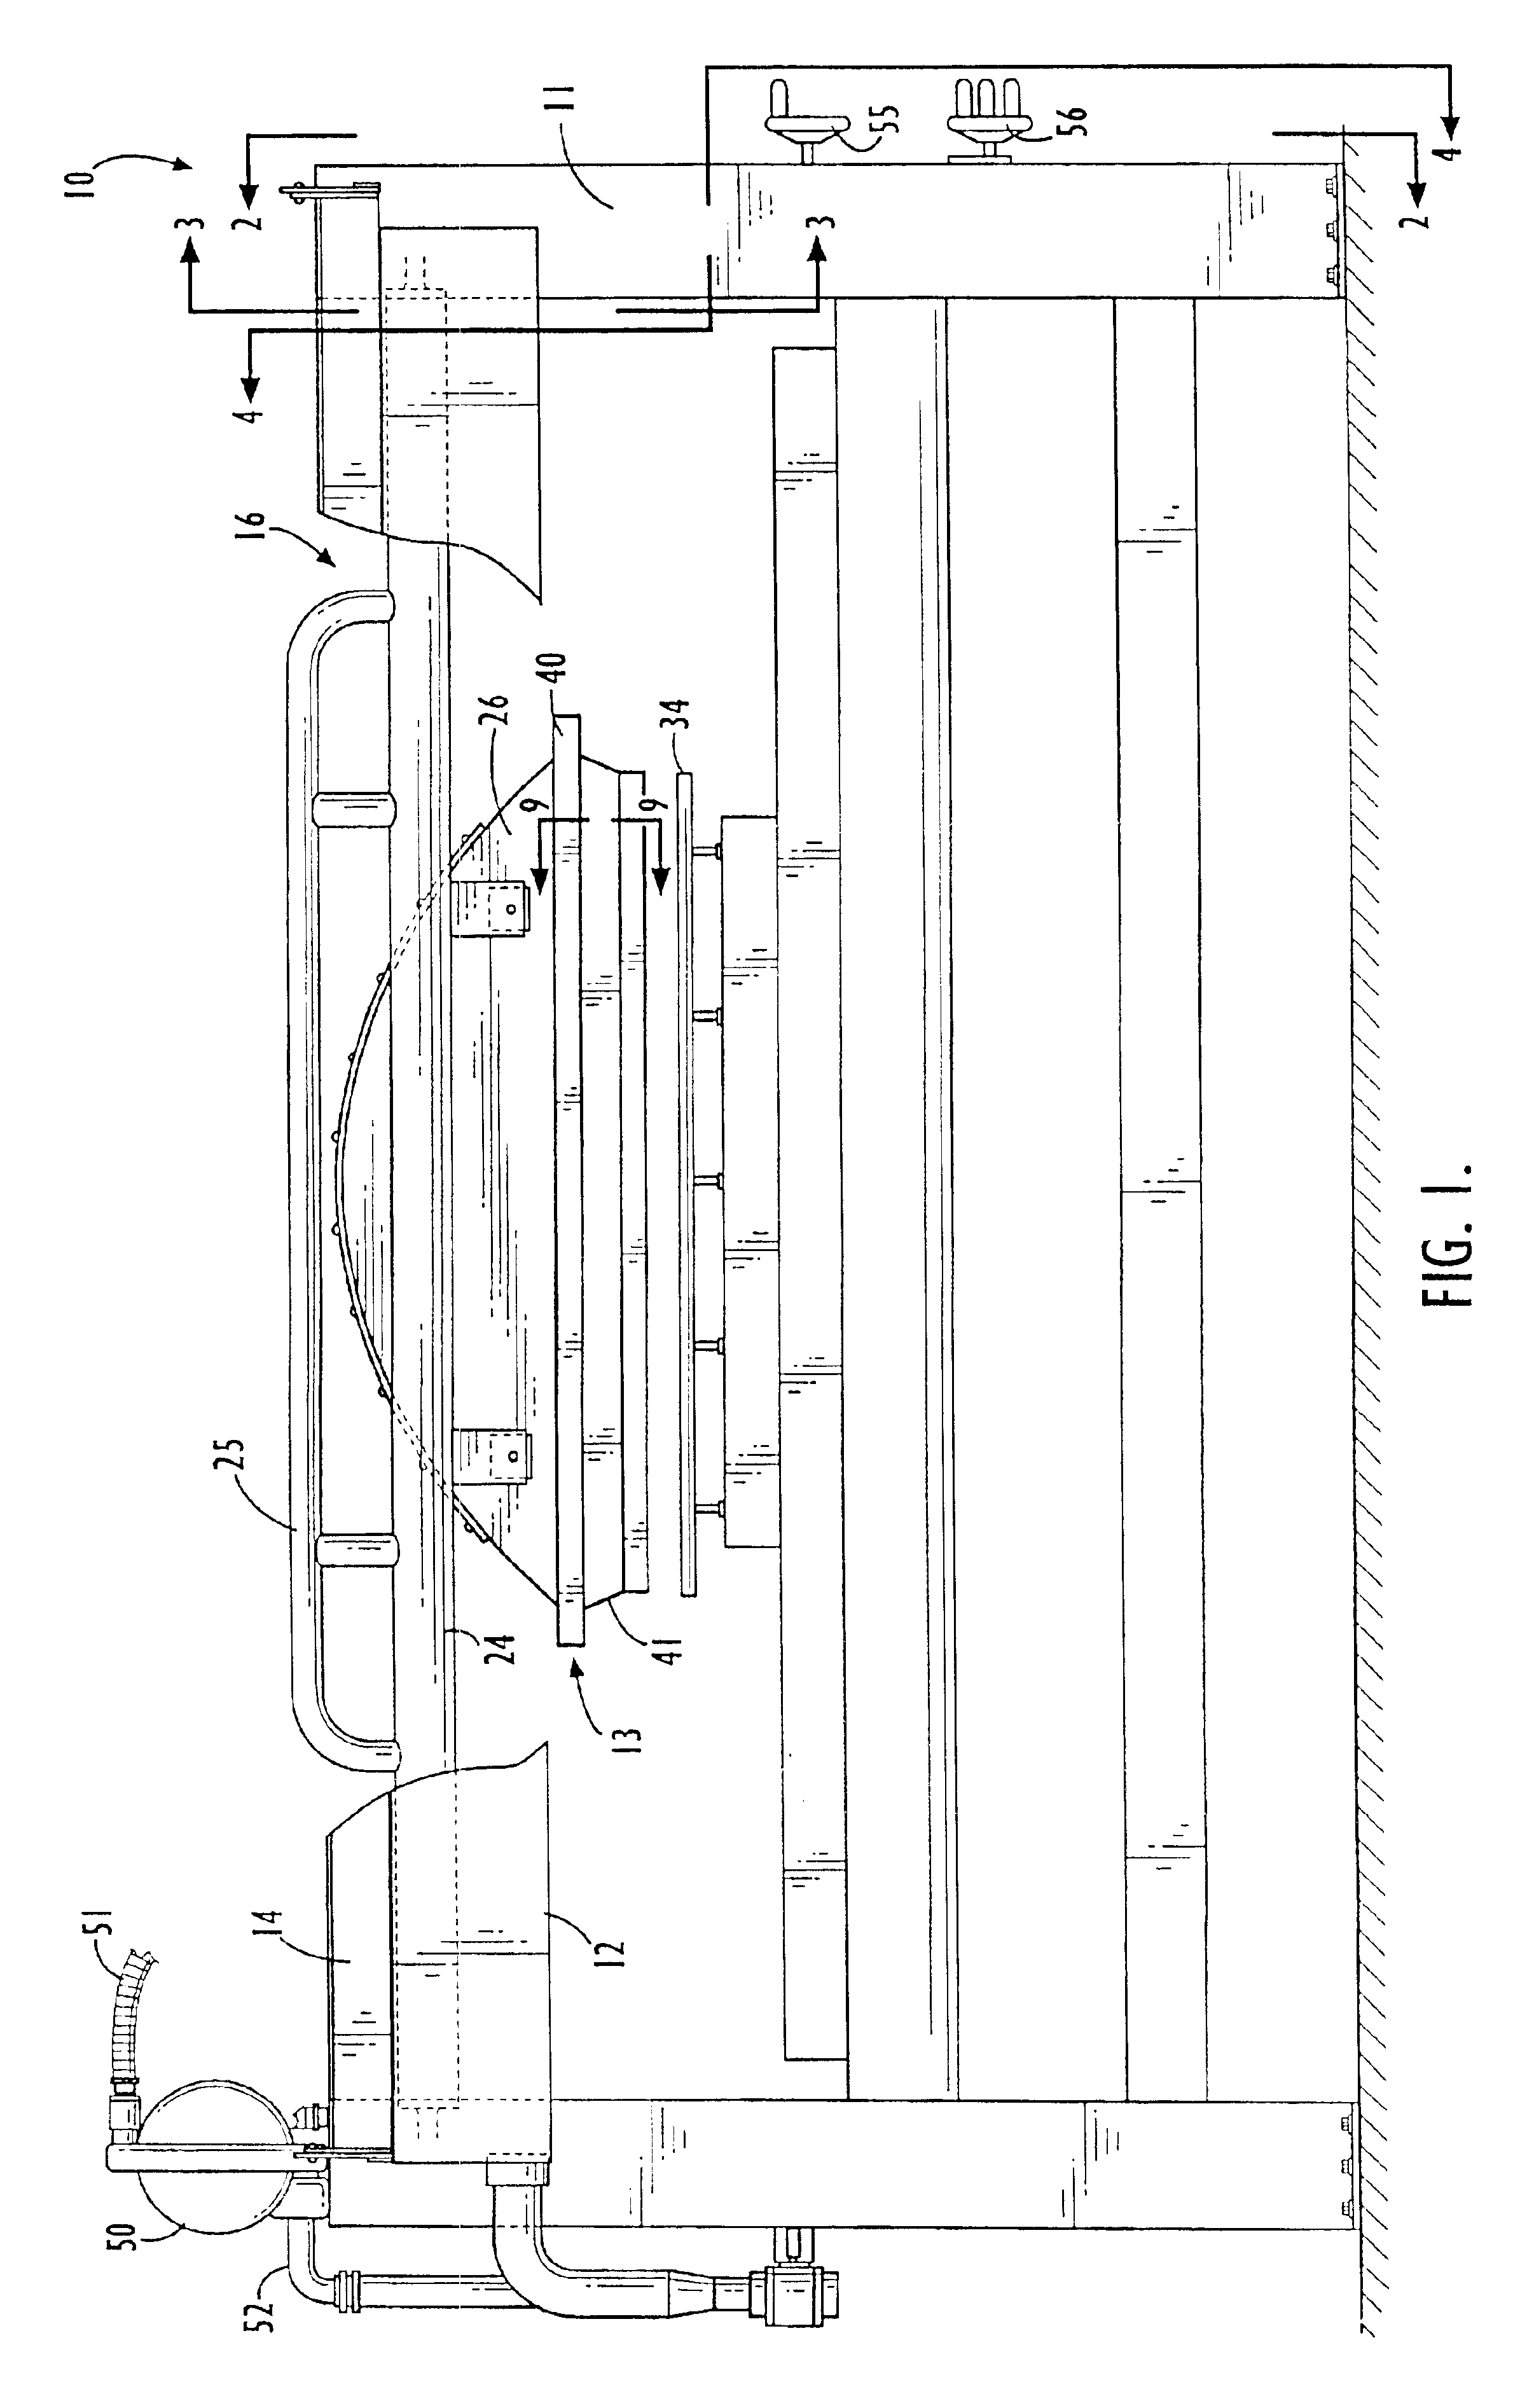 Apparatus for applying foamed coating material to a traveling textile substrate